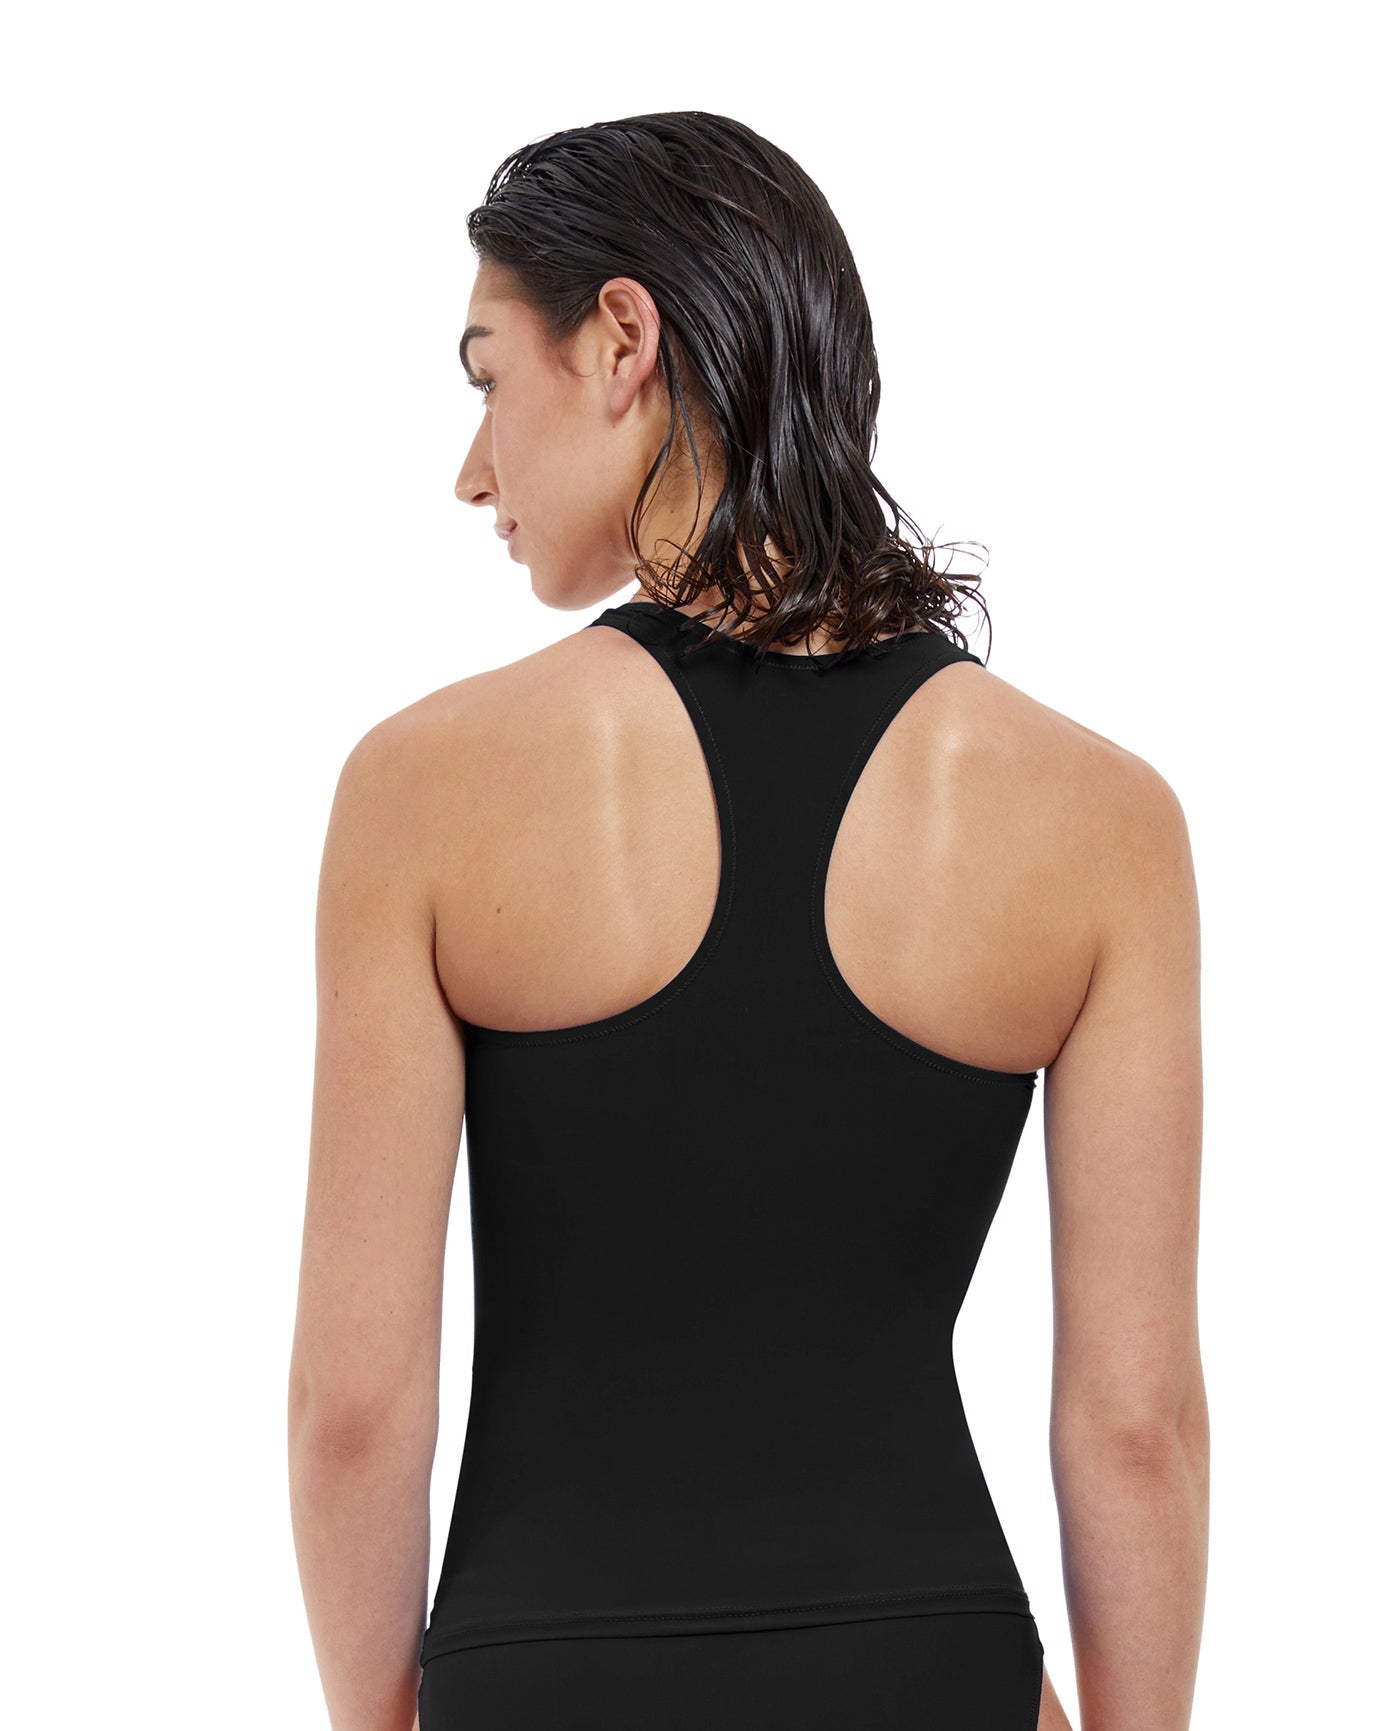 Back View Of Free Sport Ultimate Wave D-Cup Y-Back Tankini Top | FREE SPORT ULTIMATE WAVE BLACK